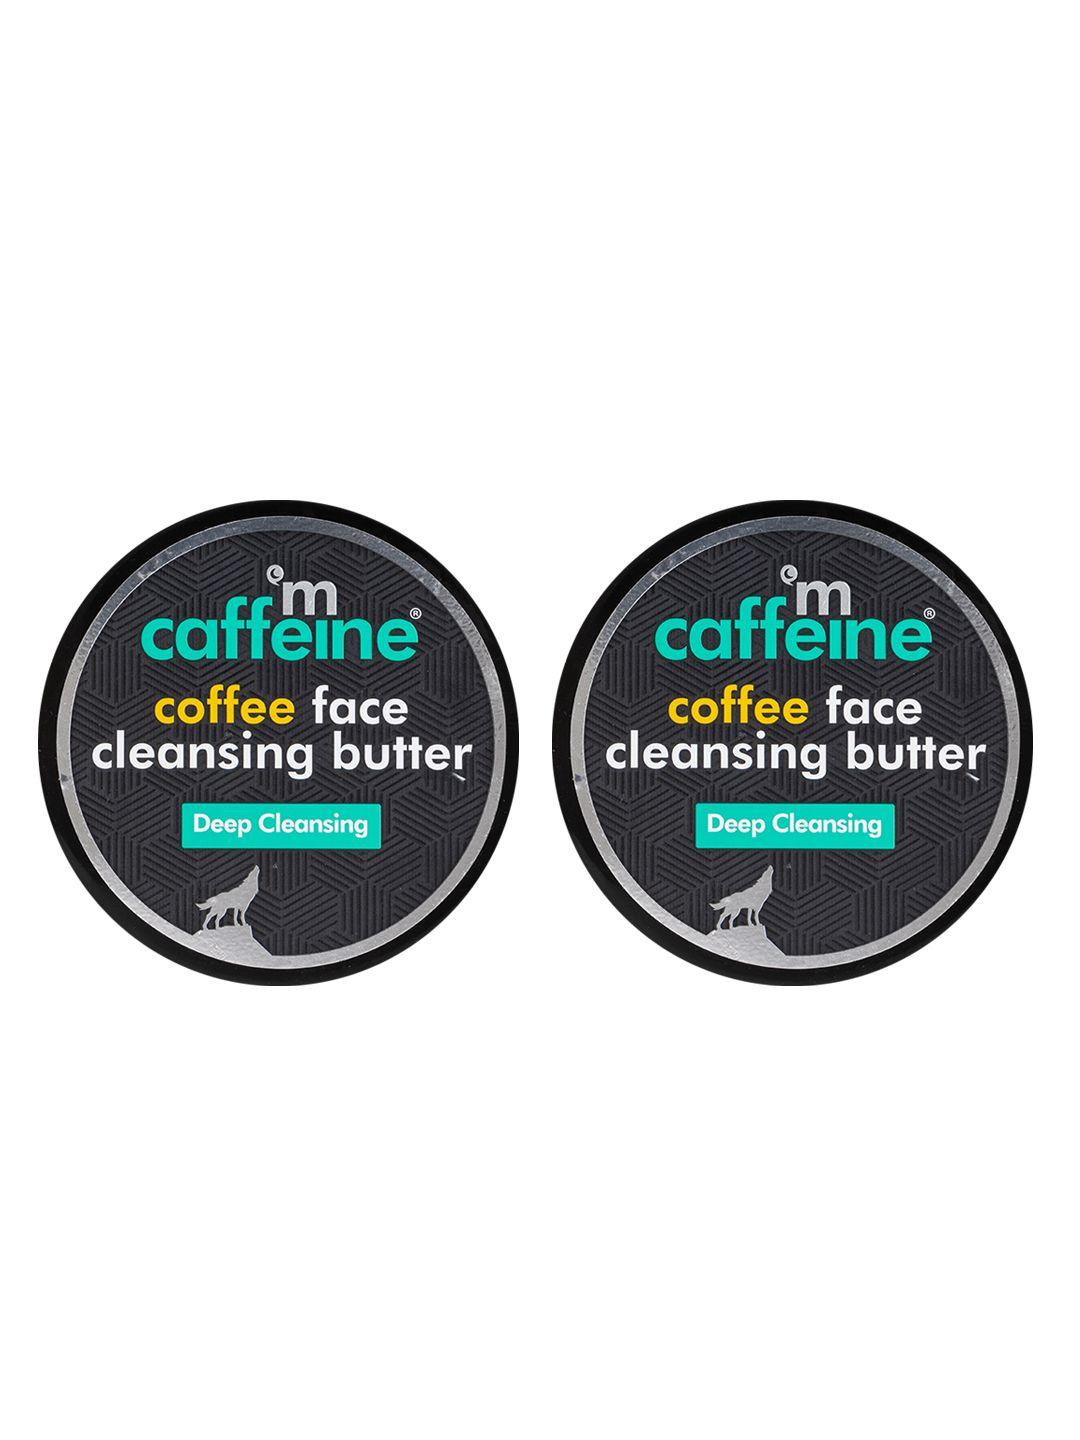 mcaffeine set of 2 coffee face cleansing butter for makeup & dirt removal - 100g each